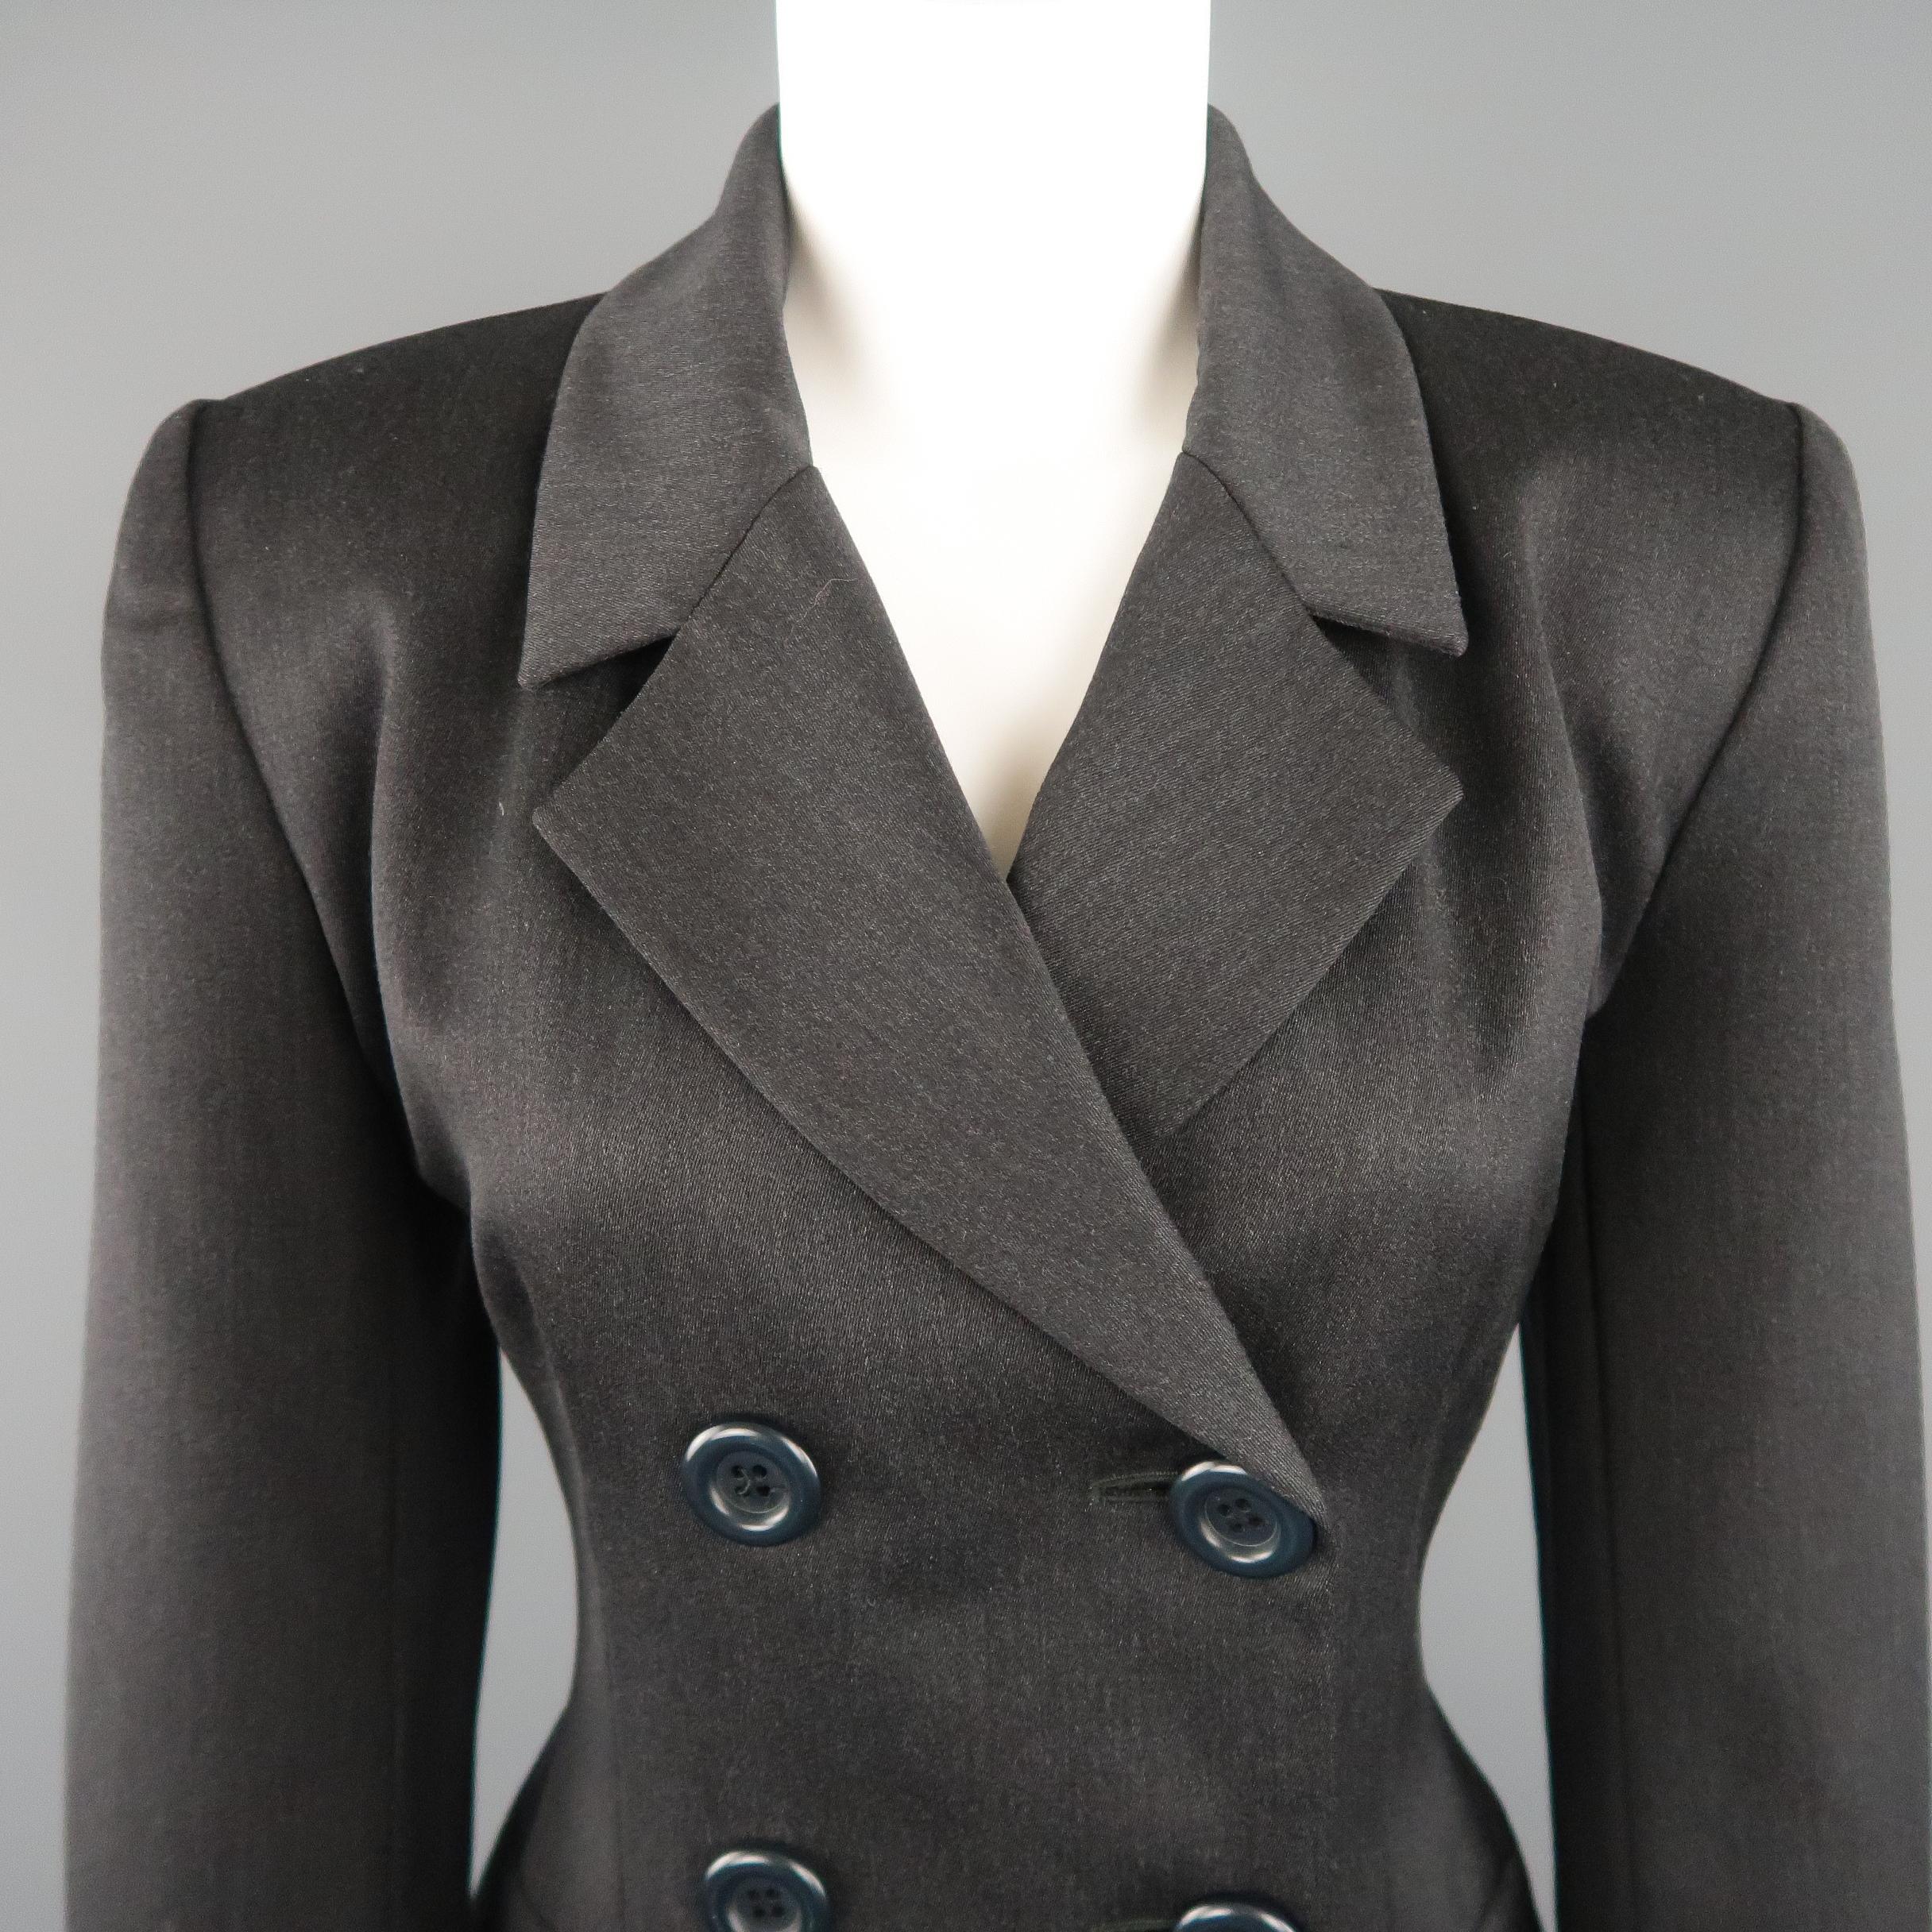 Vintage YVES SAINT LAURENT ENCORE sport jacket comes in charcoal fabric with a pointed lapel, padded shoulders, flap pockets, and double breasted closure with teal buttons. Made in France.
 
Excellent Pre-Owned Condition.
Marked: 6
 
Measurements:
